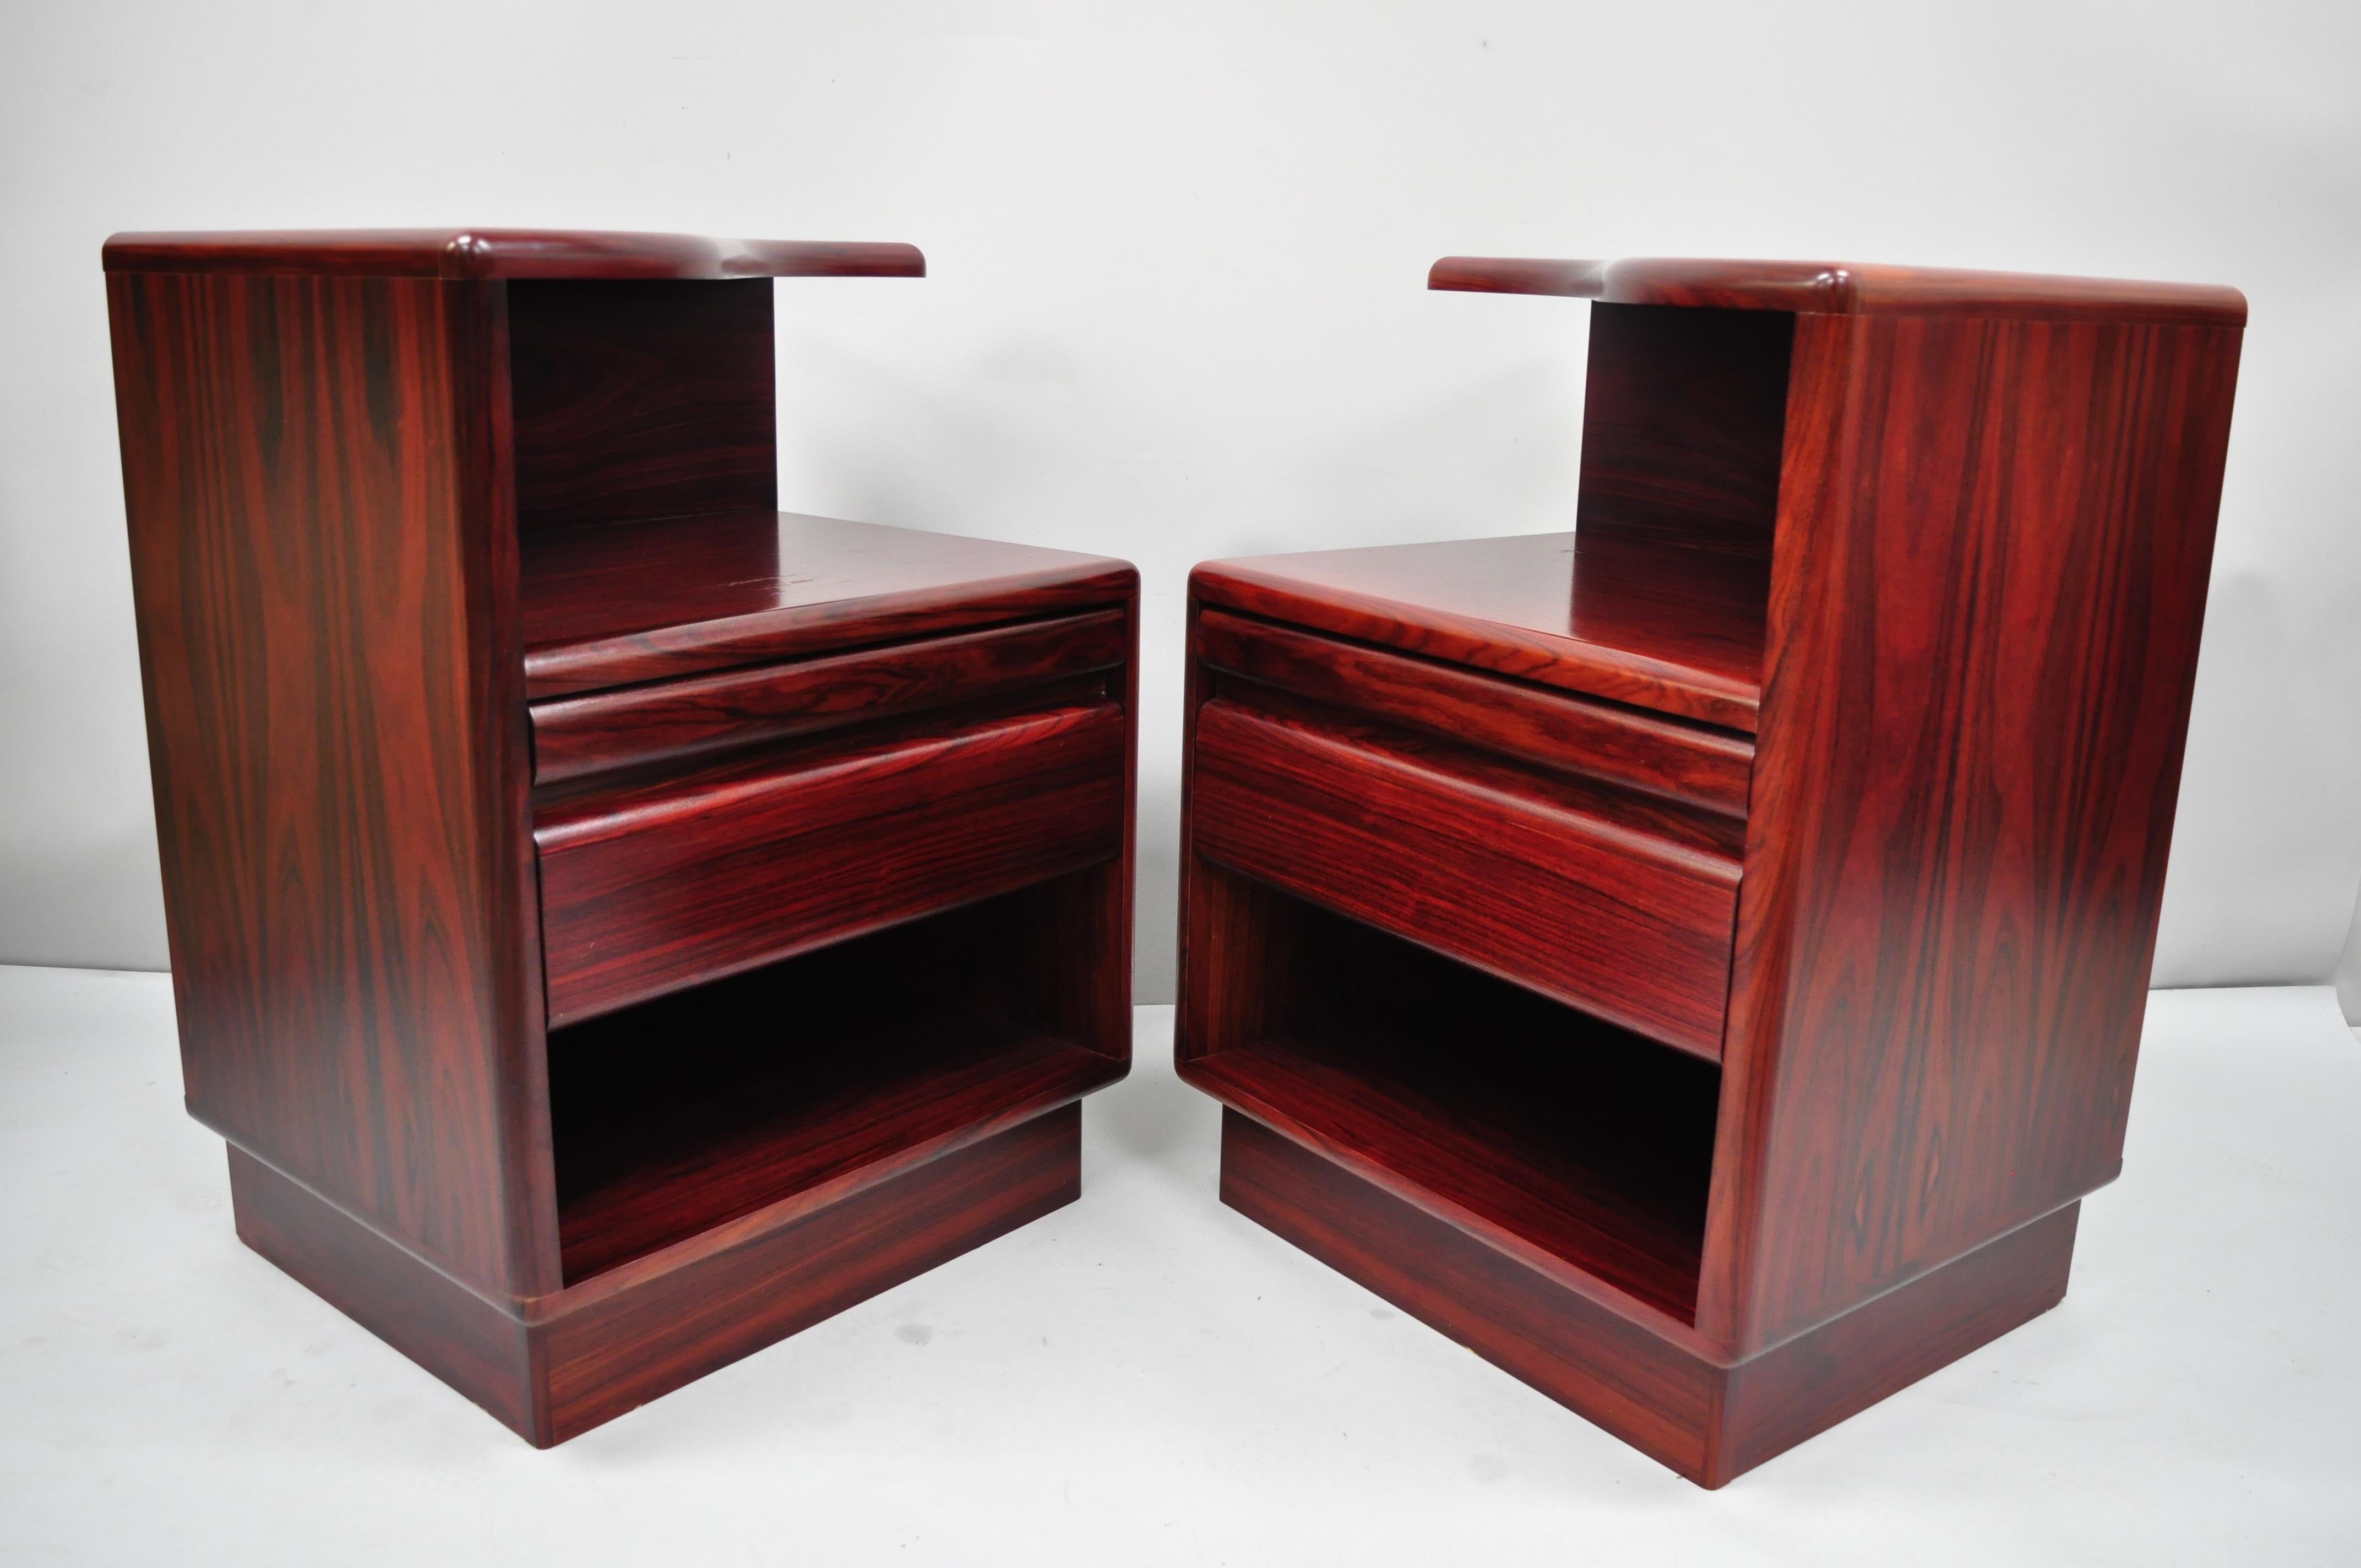 Pair of Mid-Century Modern Danish modern rosewood nightstands tables by Mobican. Items feature pullout surface, shaped tops, one drawer, beautiful wood grain, original label, clean modernist lines, sleek sculptural form, circa late 20th century.